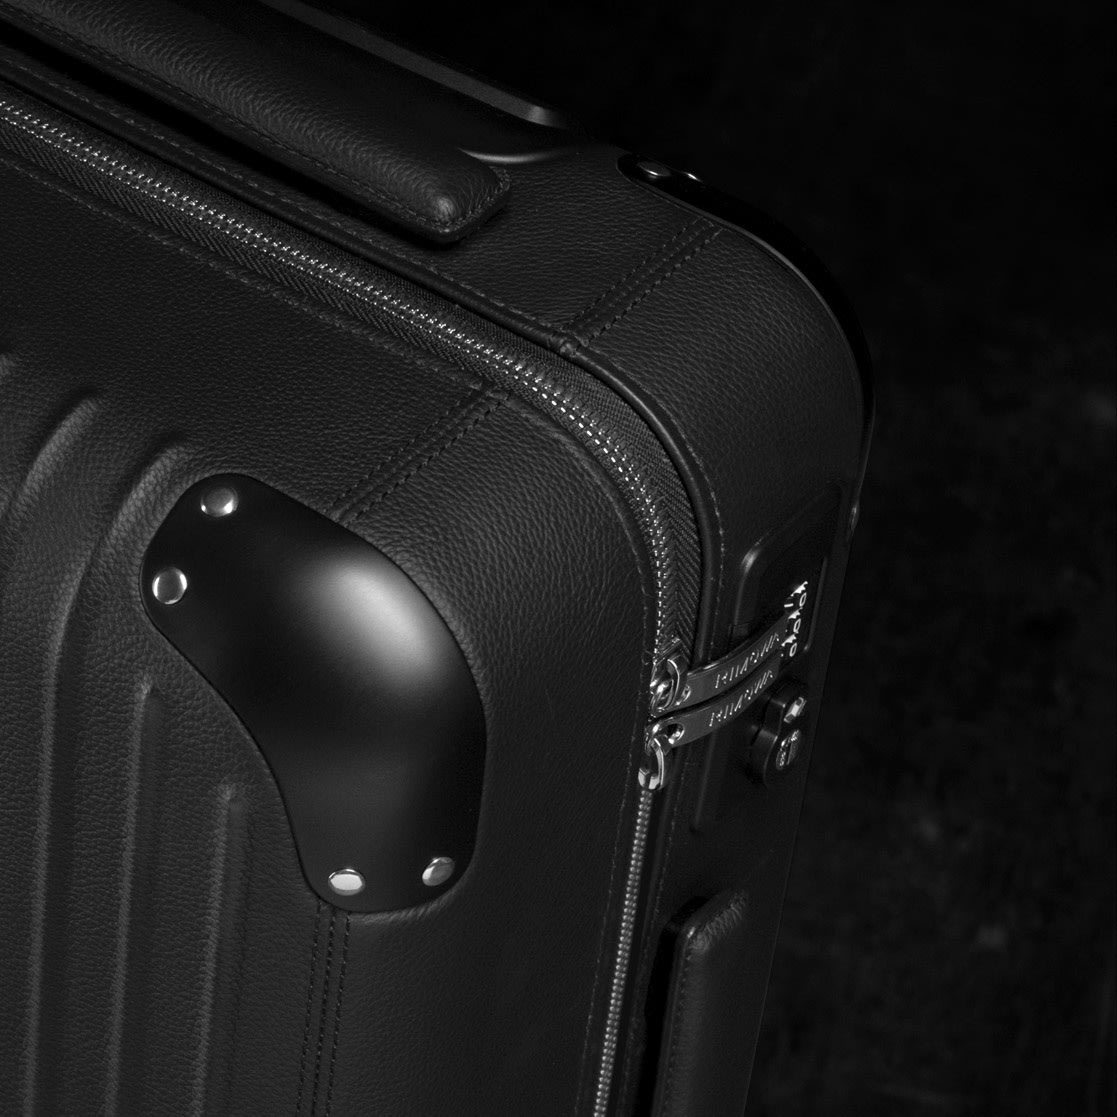 Rimowa's first-ever leather suitcase is gorgeous, but it will cost you